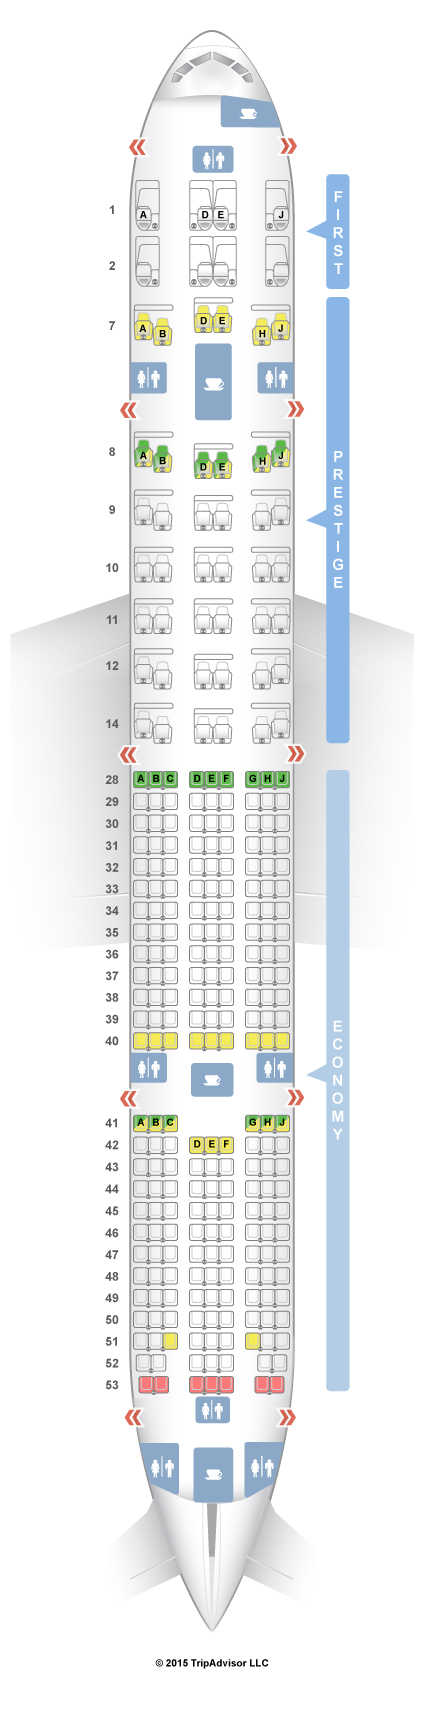 Cathay Pacific Boeing 777 300er Seating Chart